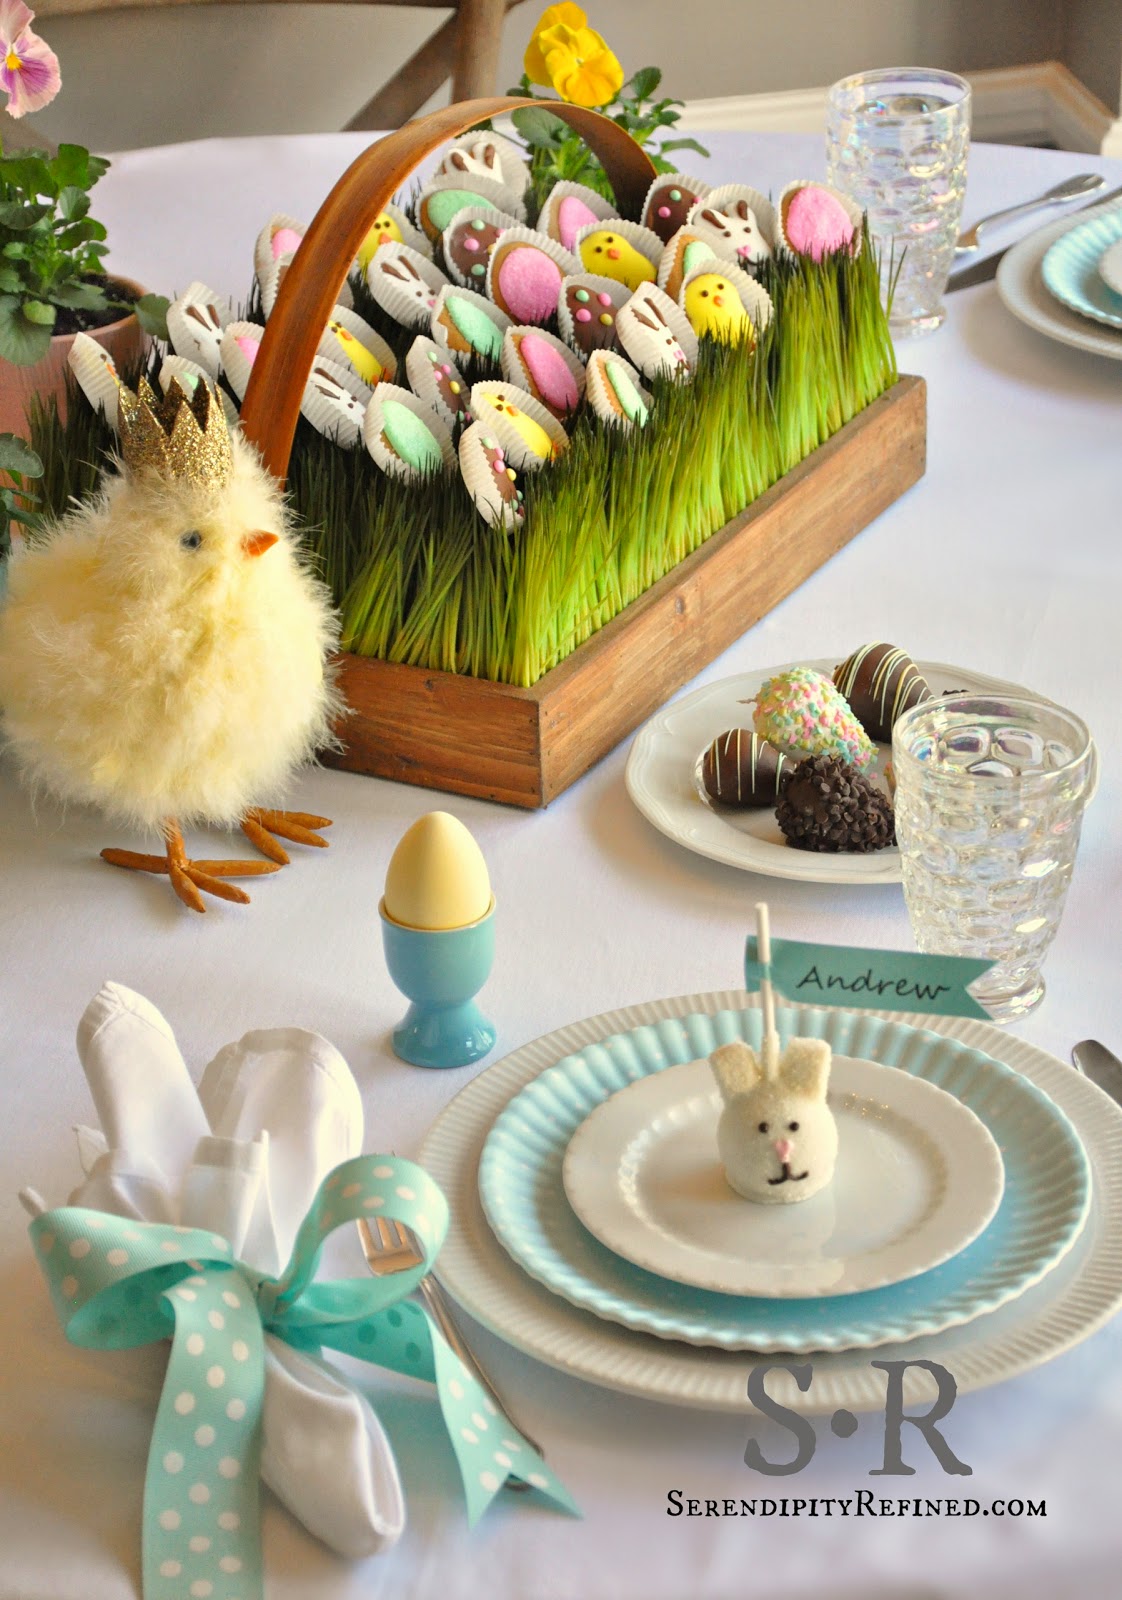 Serendipity Refined Blog: Pastel Spring EDIBLE Easter Table Decorating